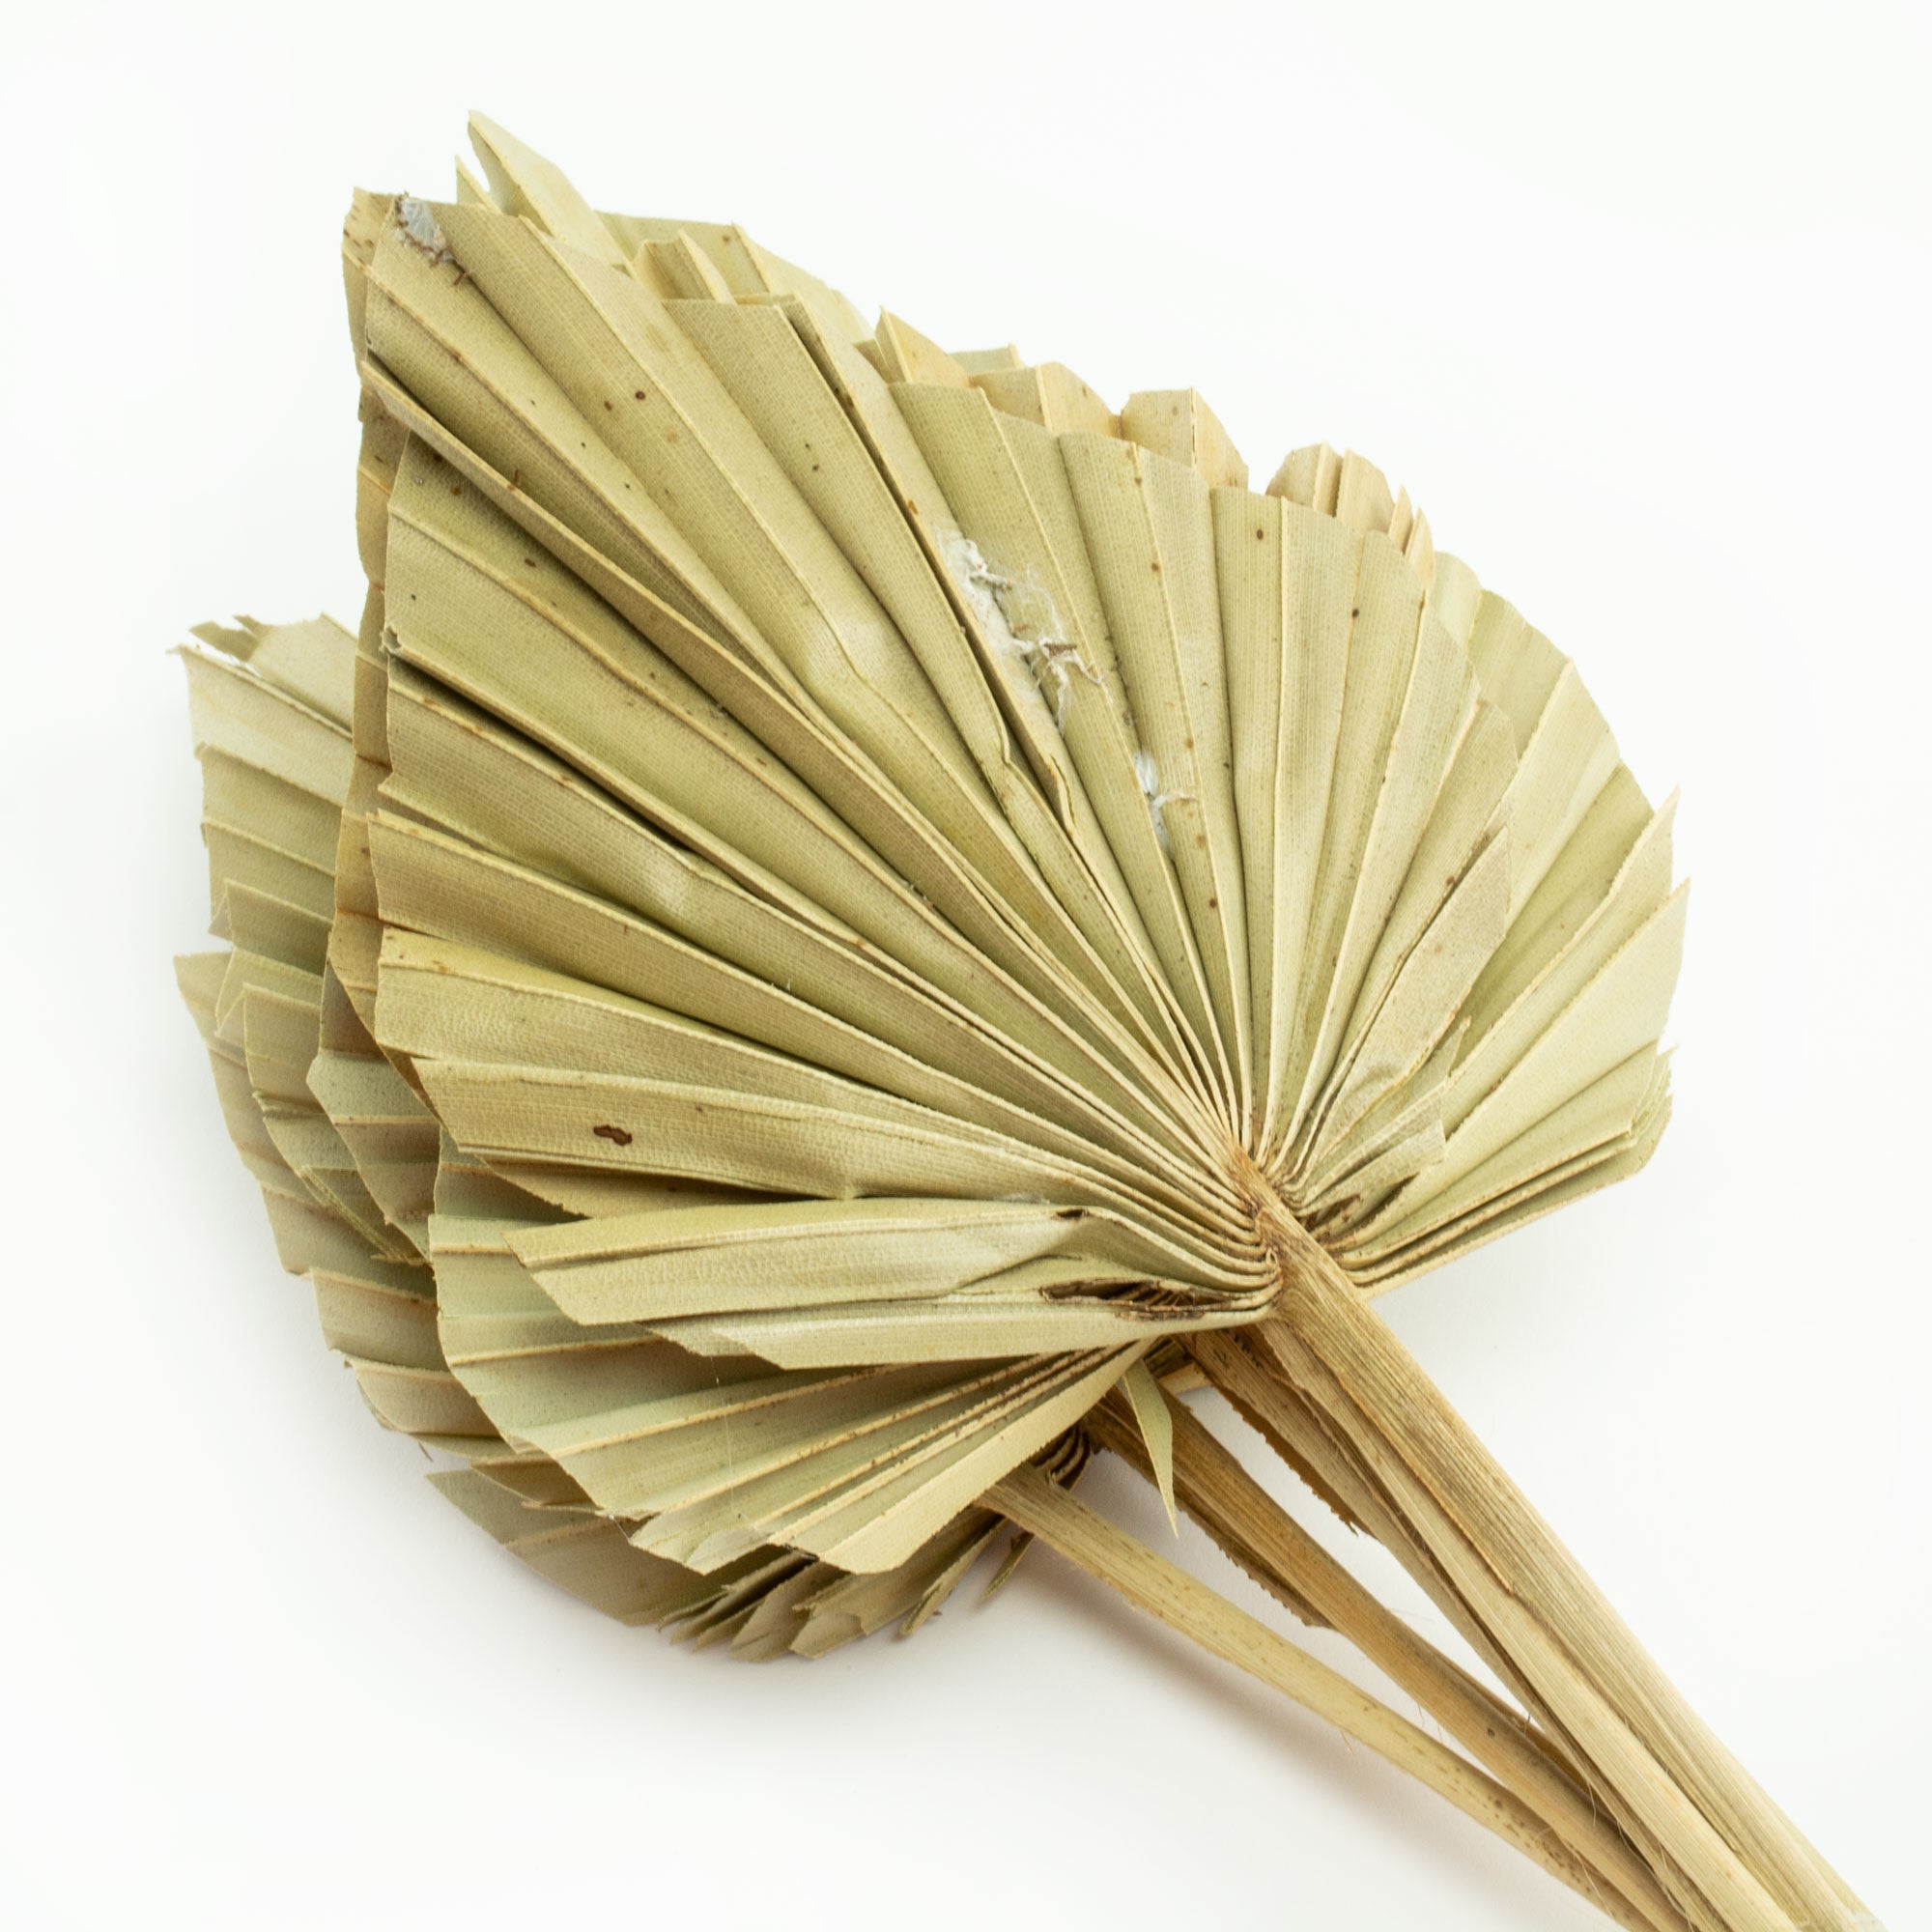 This image shows second quality bleached palm spears against a white background